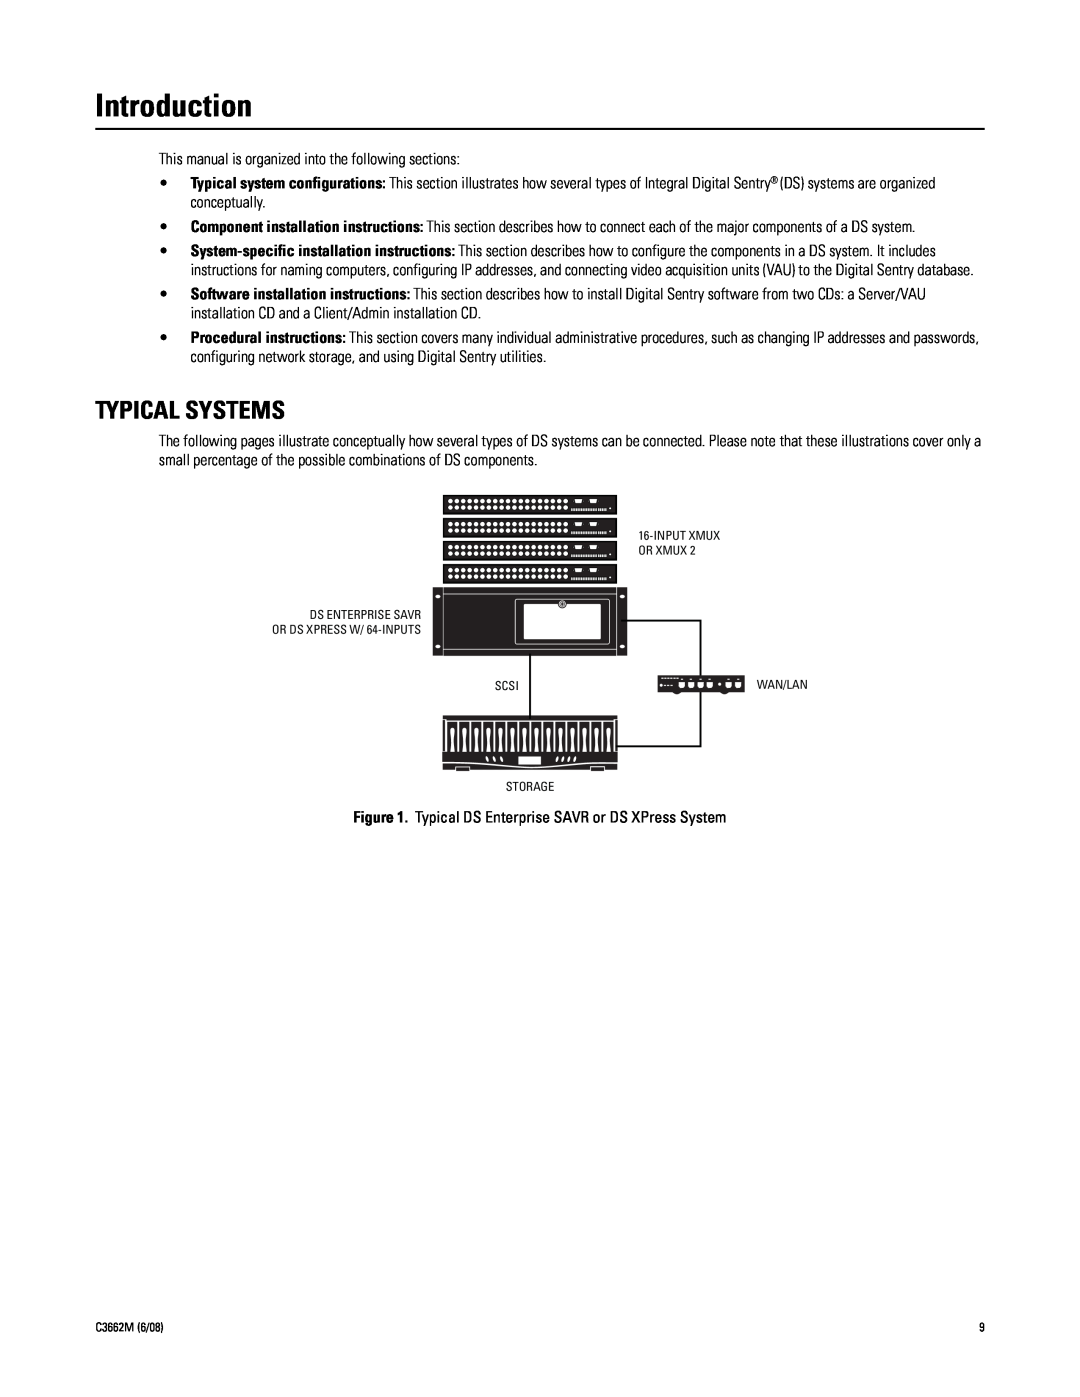 Pelco C3662M installation manual Introduction, Typical Systems 